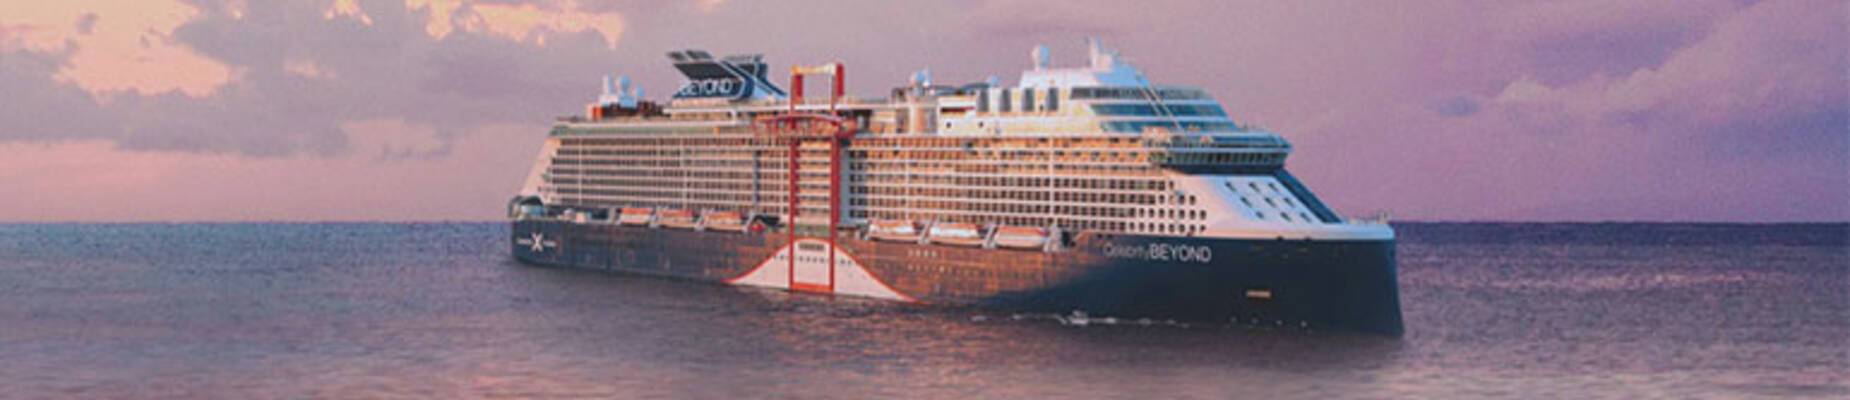 The newest Edge Series ship, Celebrity Ascent | ROL Cruise Blog